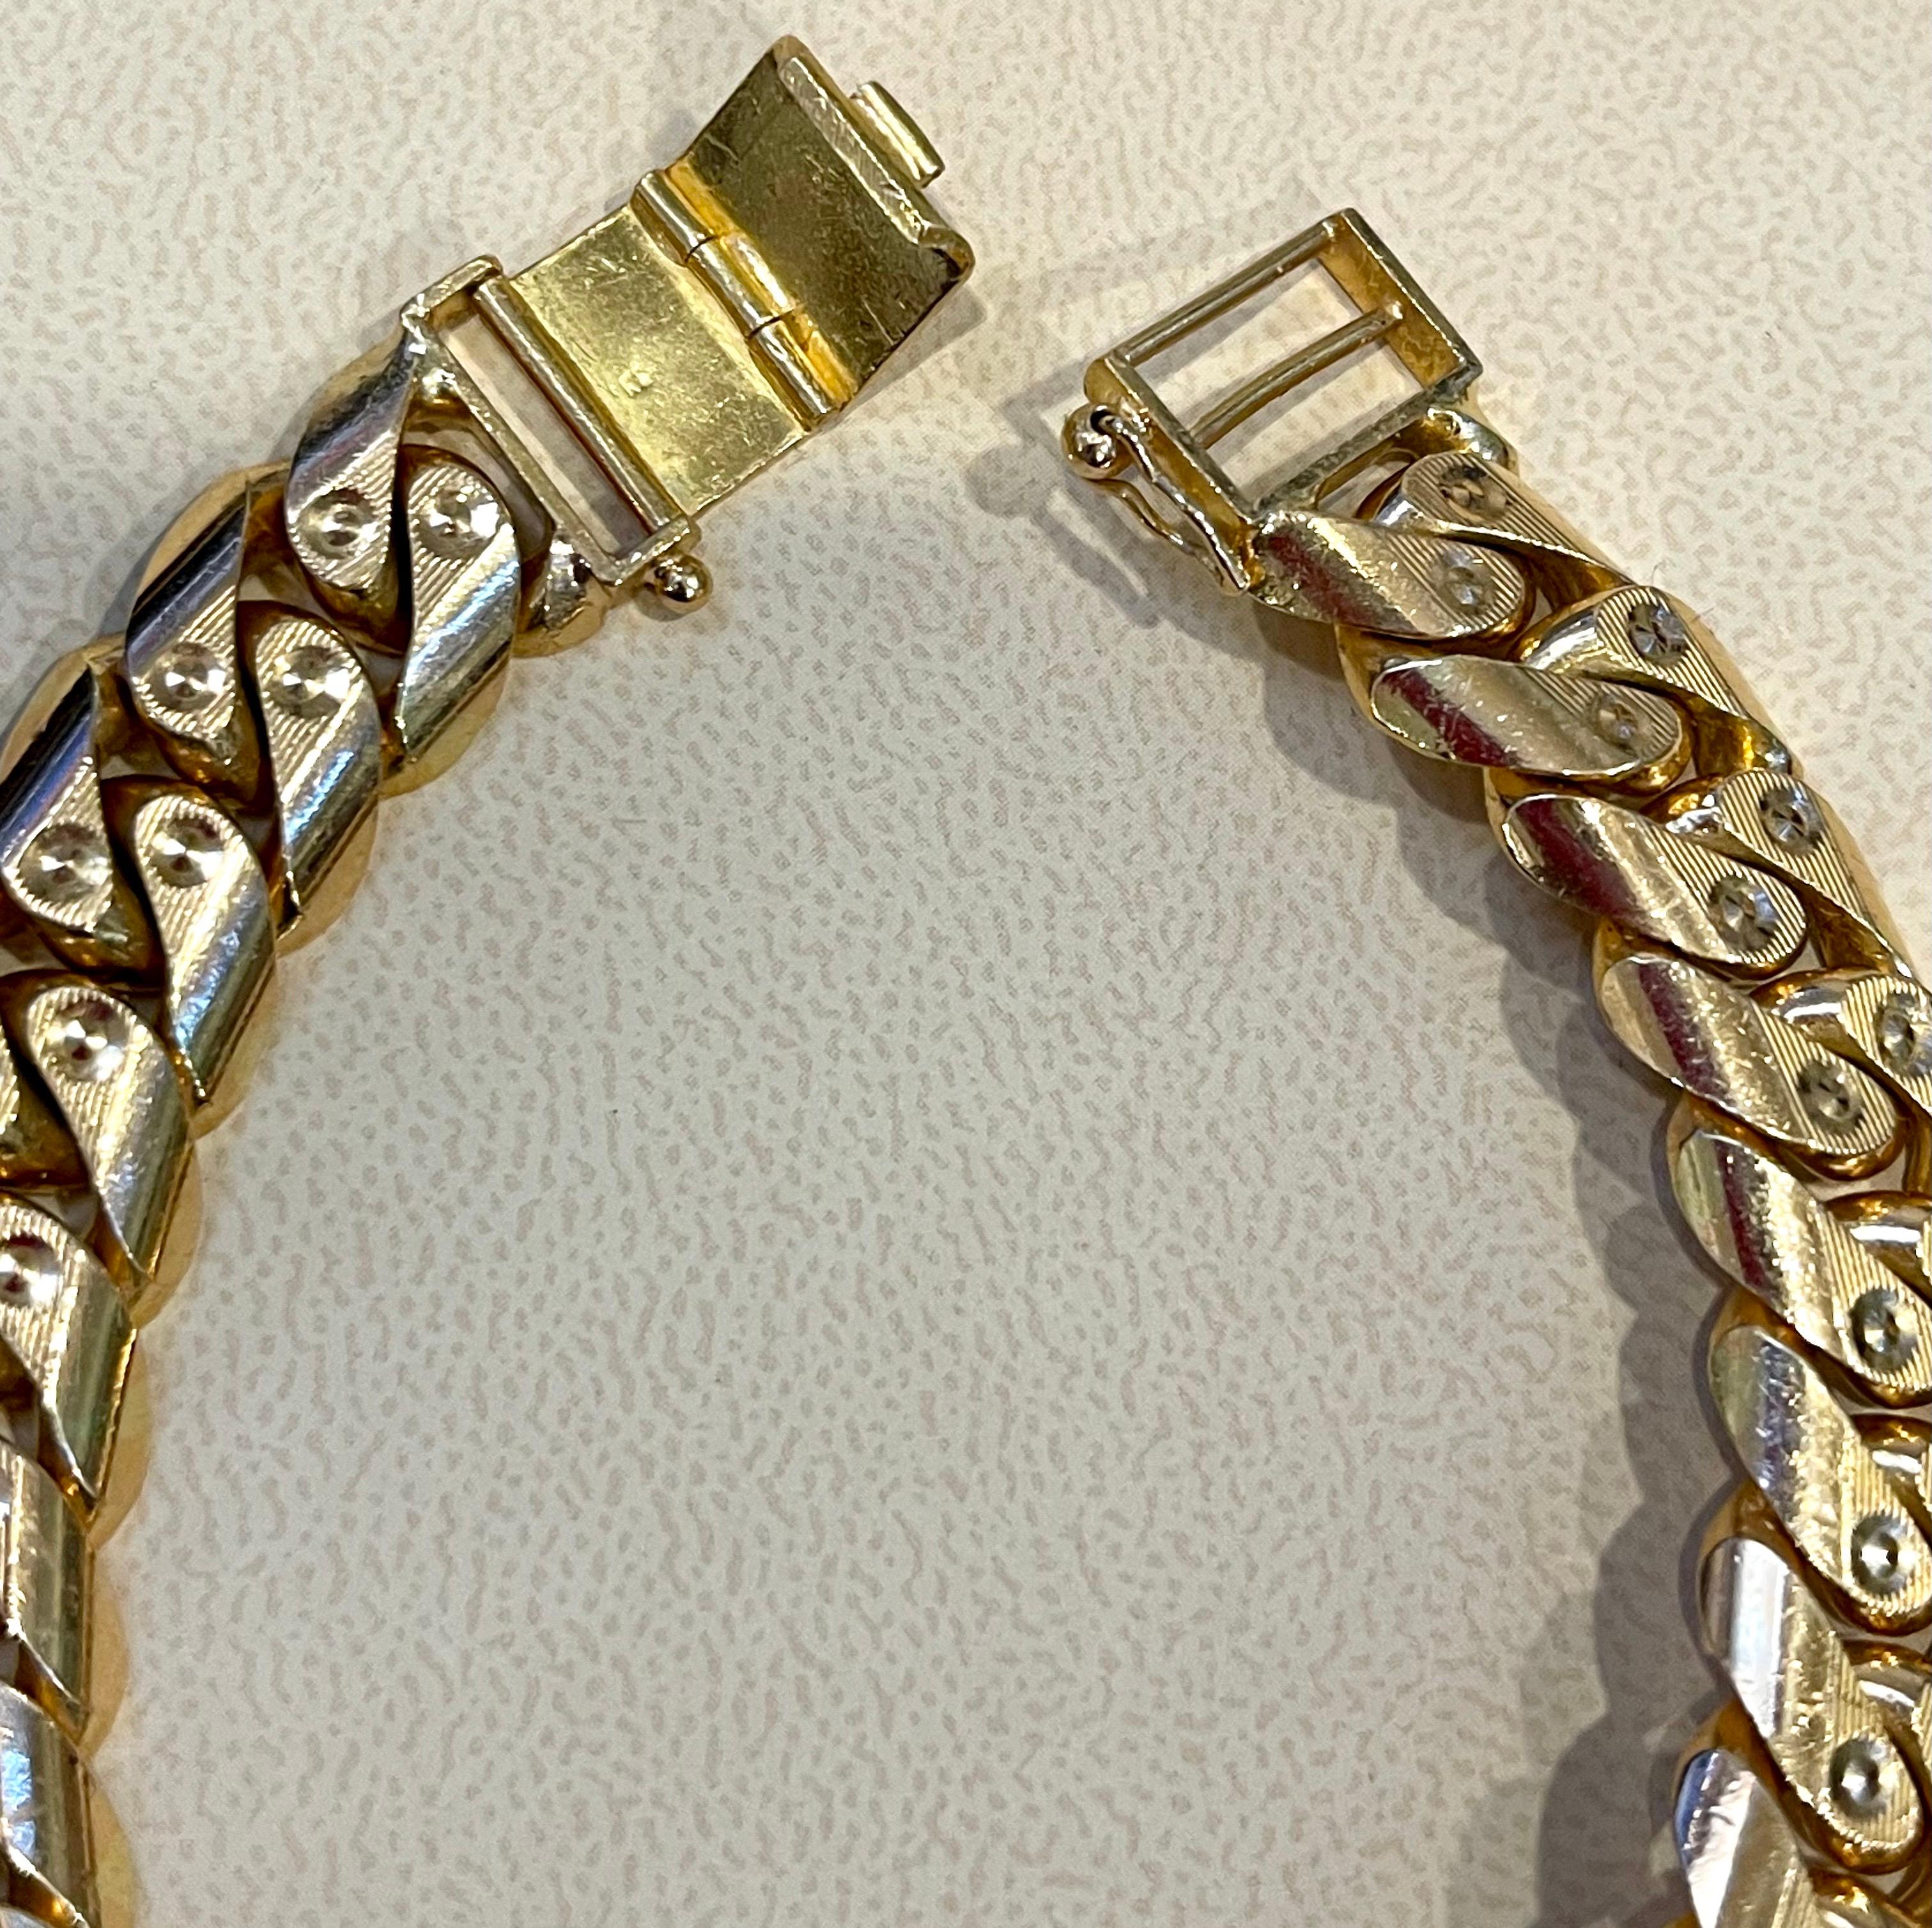 Solid 22 karat gold
Vintage 22 Karat Yellow Gold 102.1 Gm Cuban link Bracelet Unisex , 8.75 Inches
22 Karat Yellow  Gold Cuban Bracelet made of authentic solid gold.  It is  nicely polished and stamped for authenticity 916 means 22 Karat gold 

This